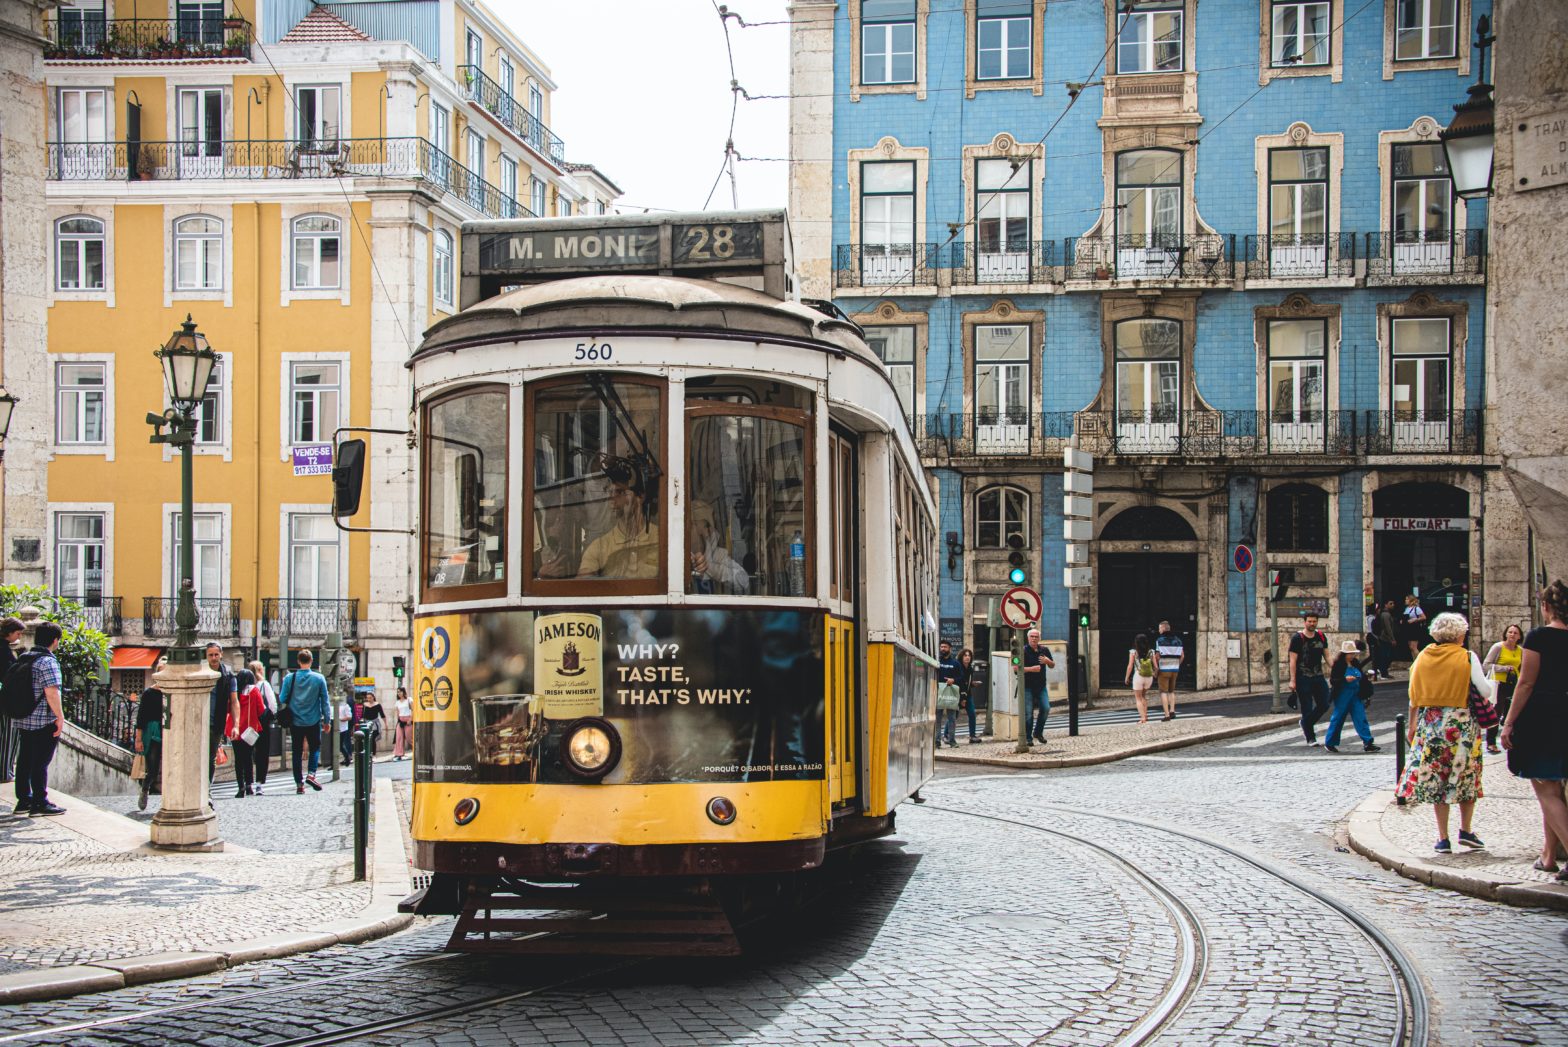 Next Stop, Lisbon! Here Are Some Romantic Activities On Offer